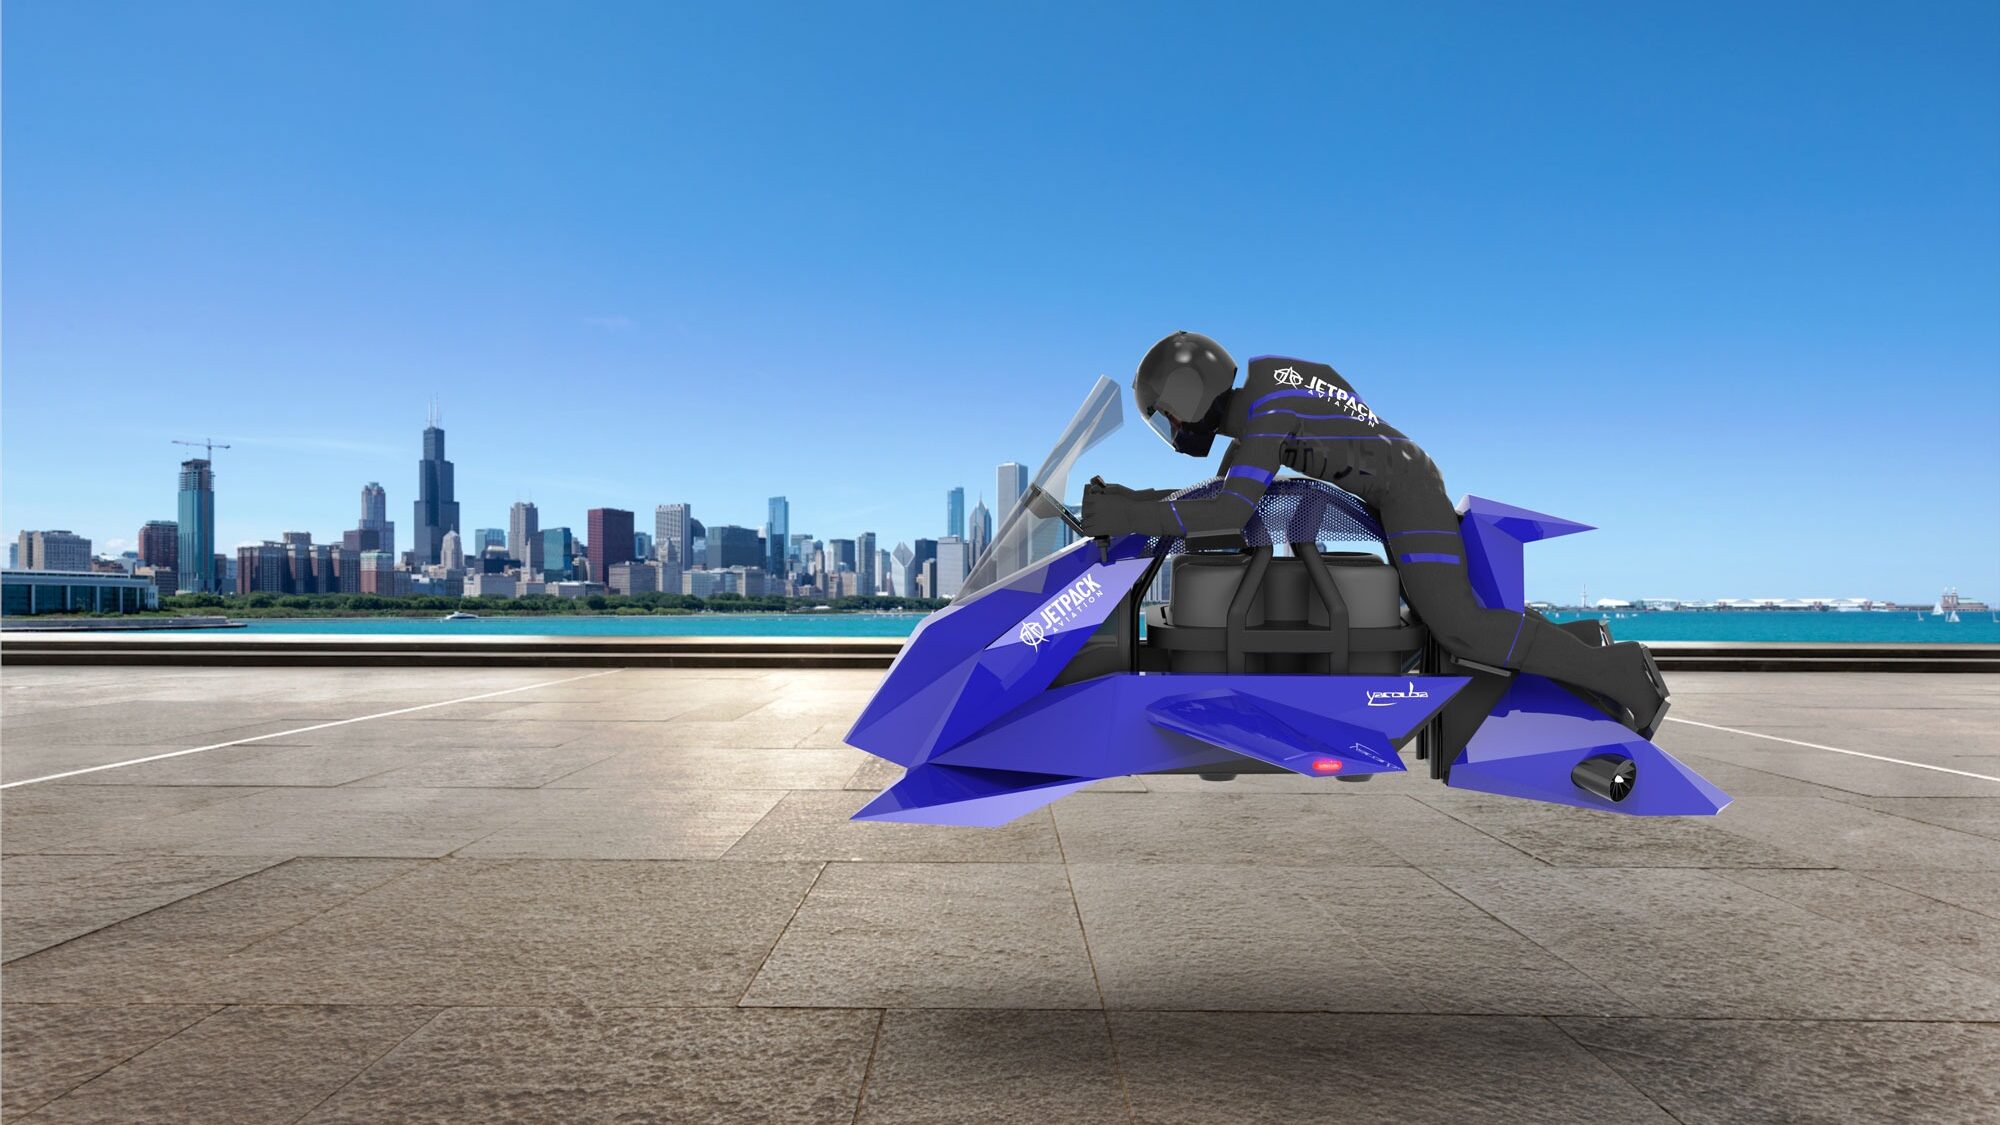 Meet the flying motorcycle that can cost you up to $380,000